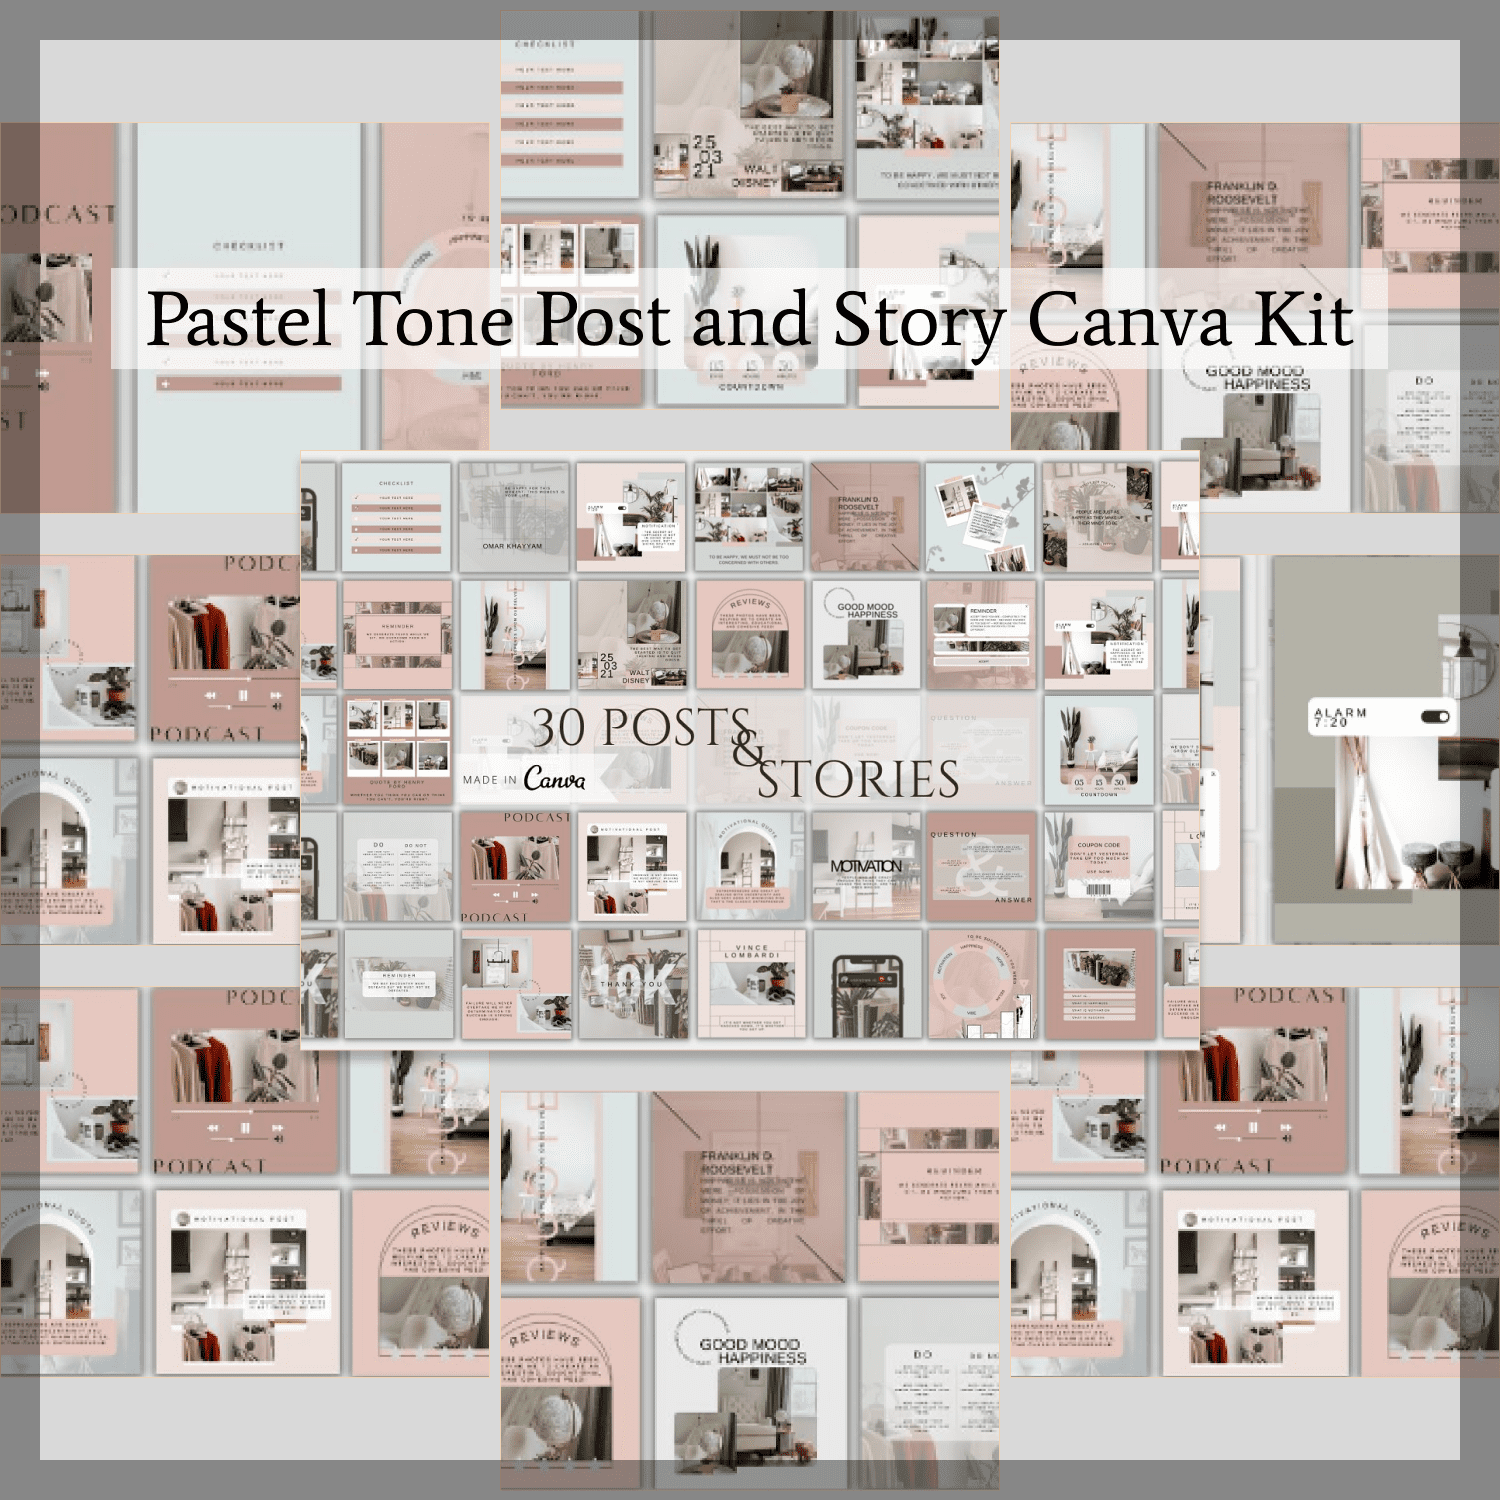 Pastel Tone Post and Story Canva Kit cover image.